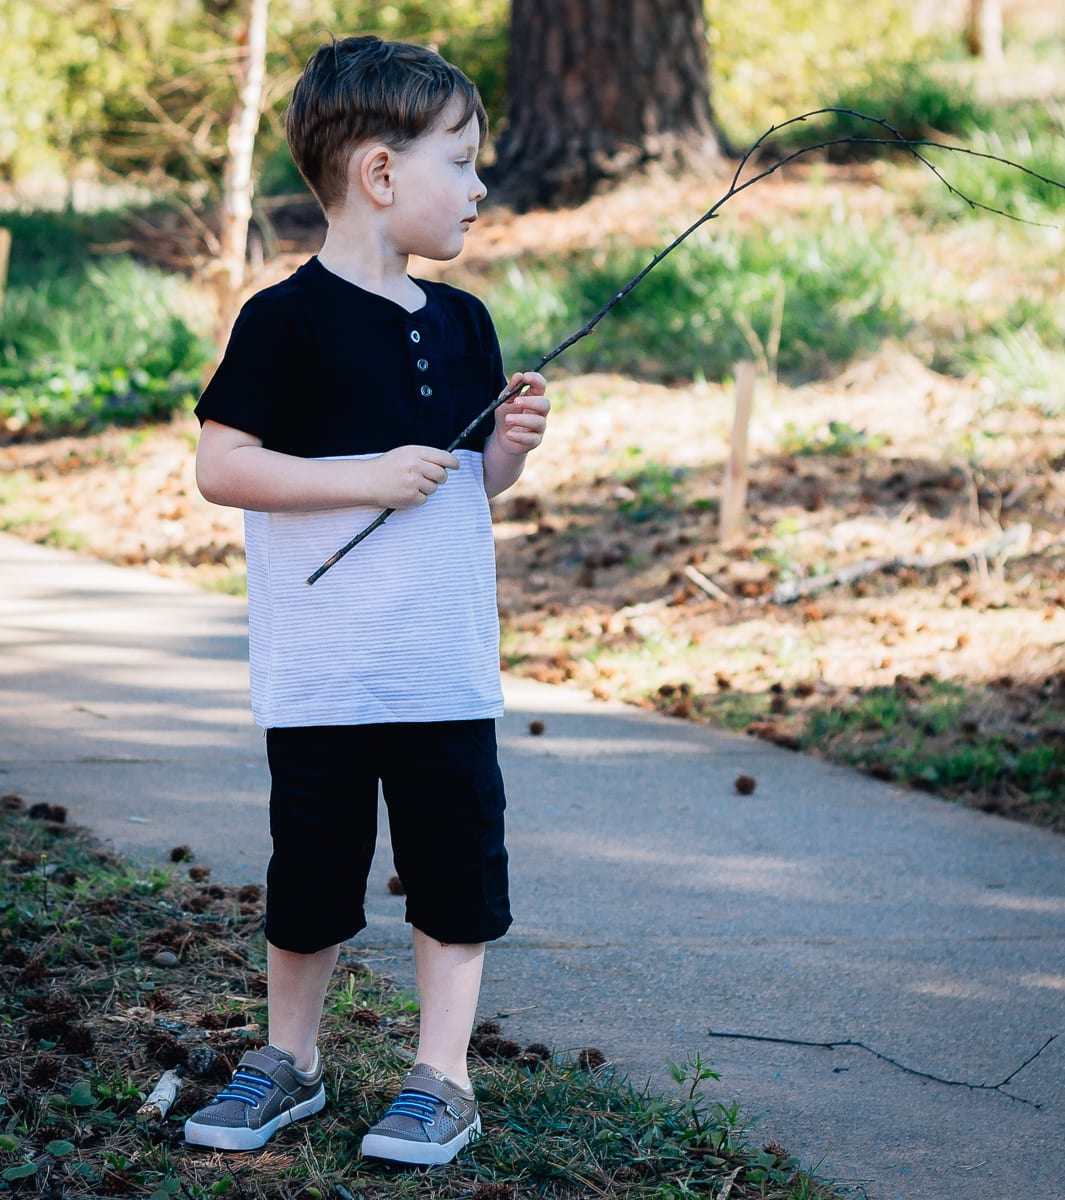 Our Favorite Spring Outfits For Babies, Toddlers And Kids